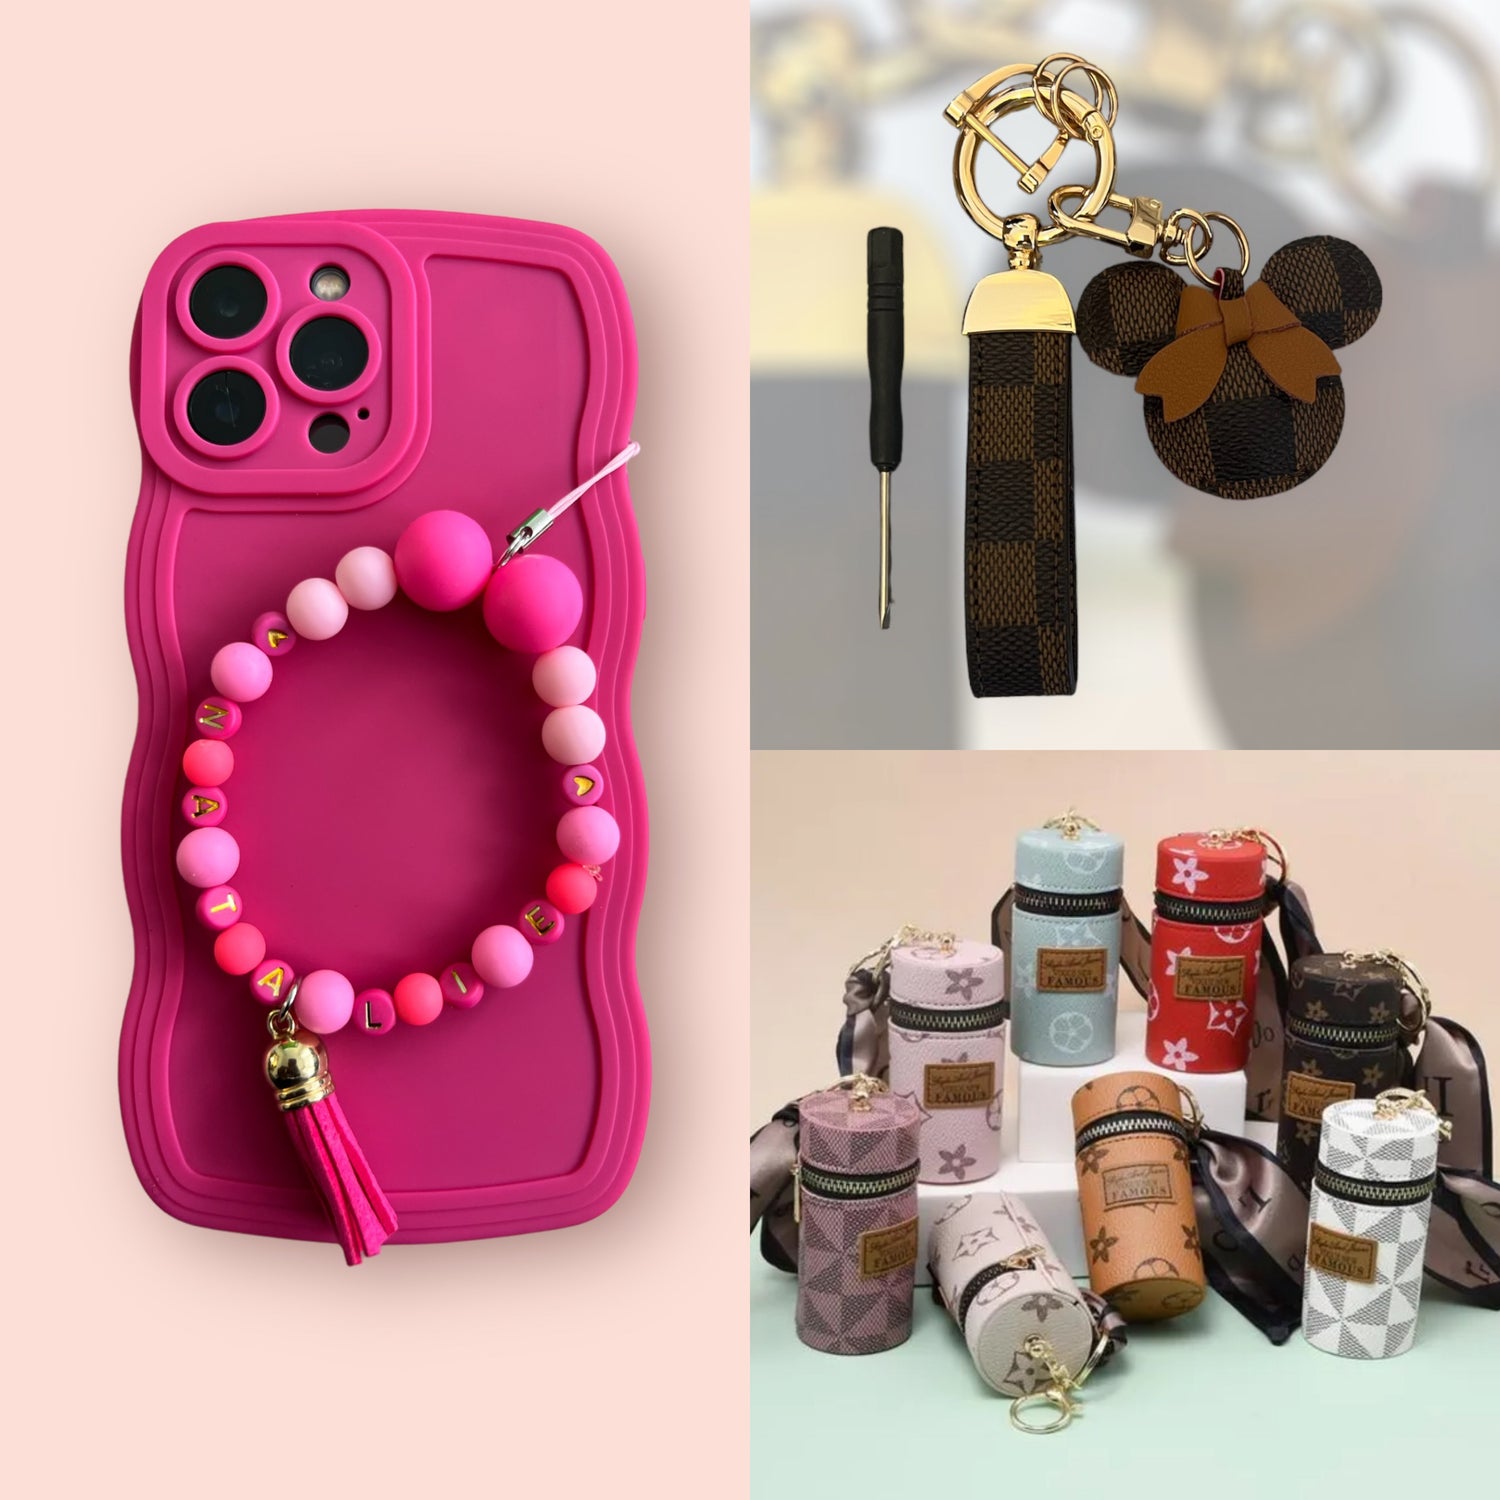 The Accessory Collection | Keyrings | Phone charms | Mini storgage